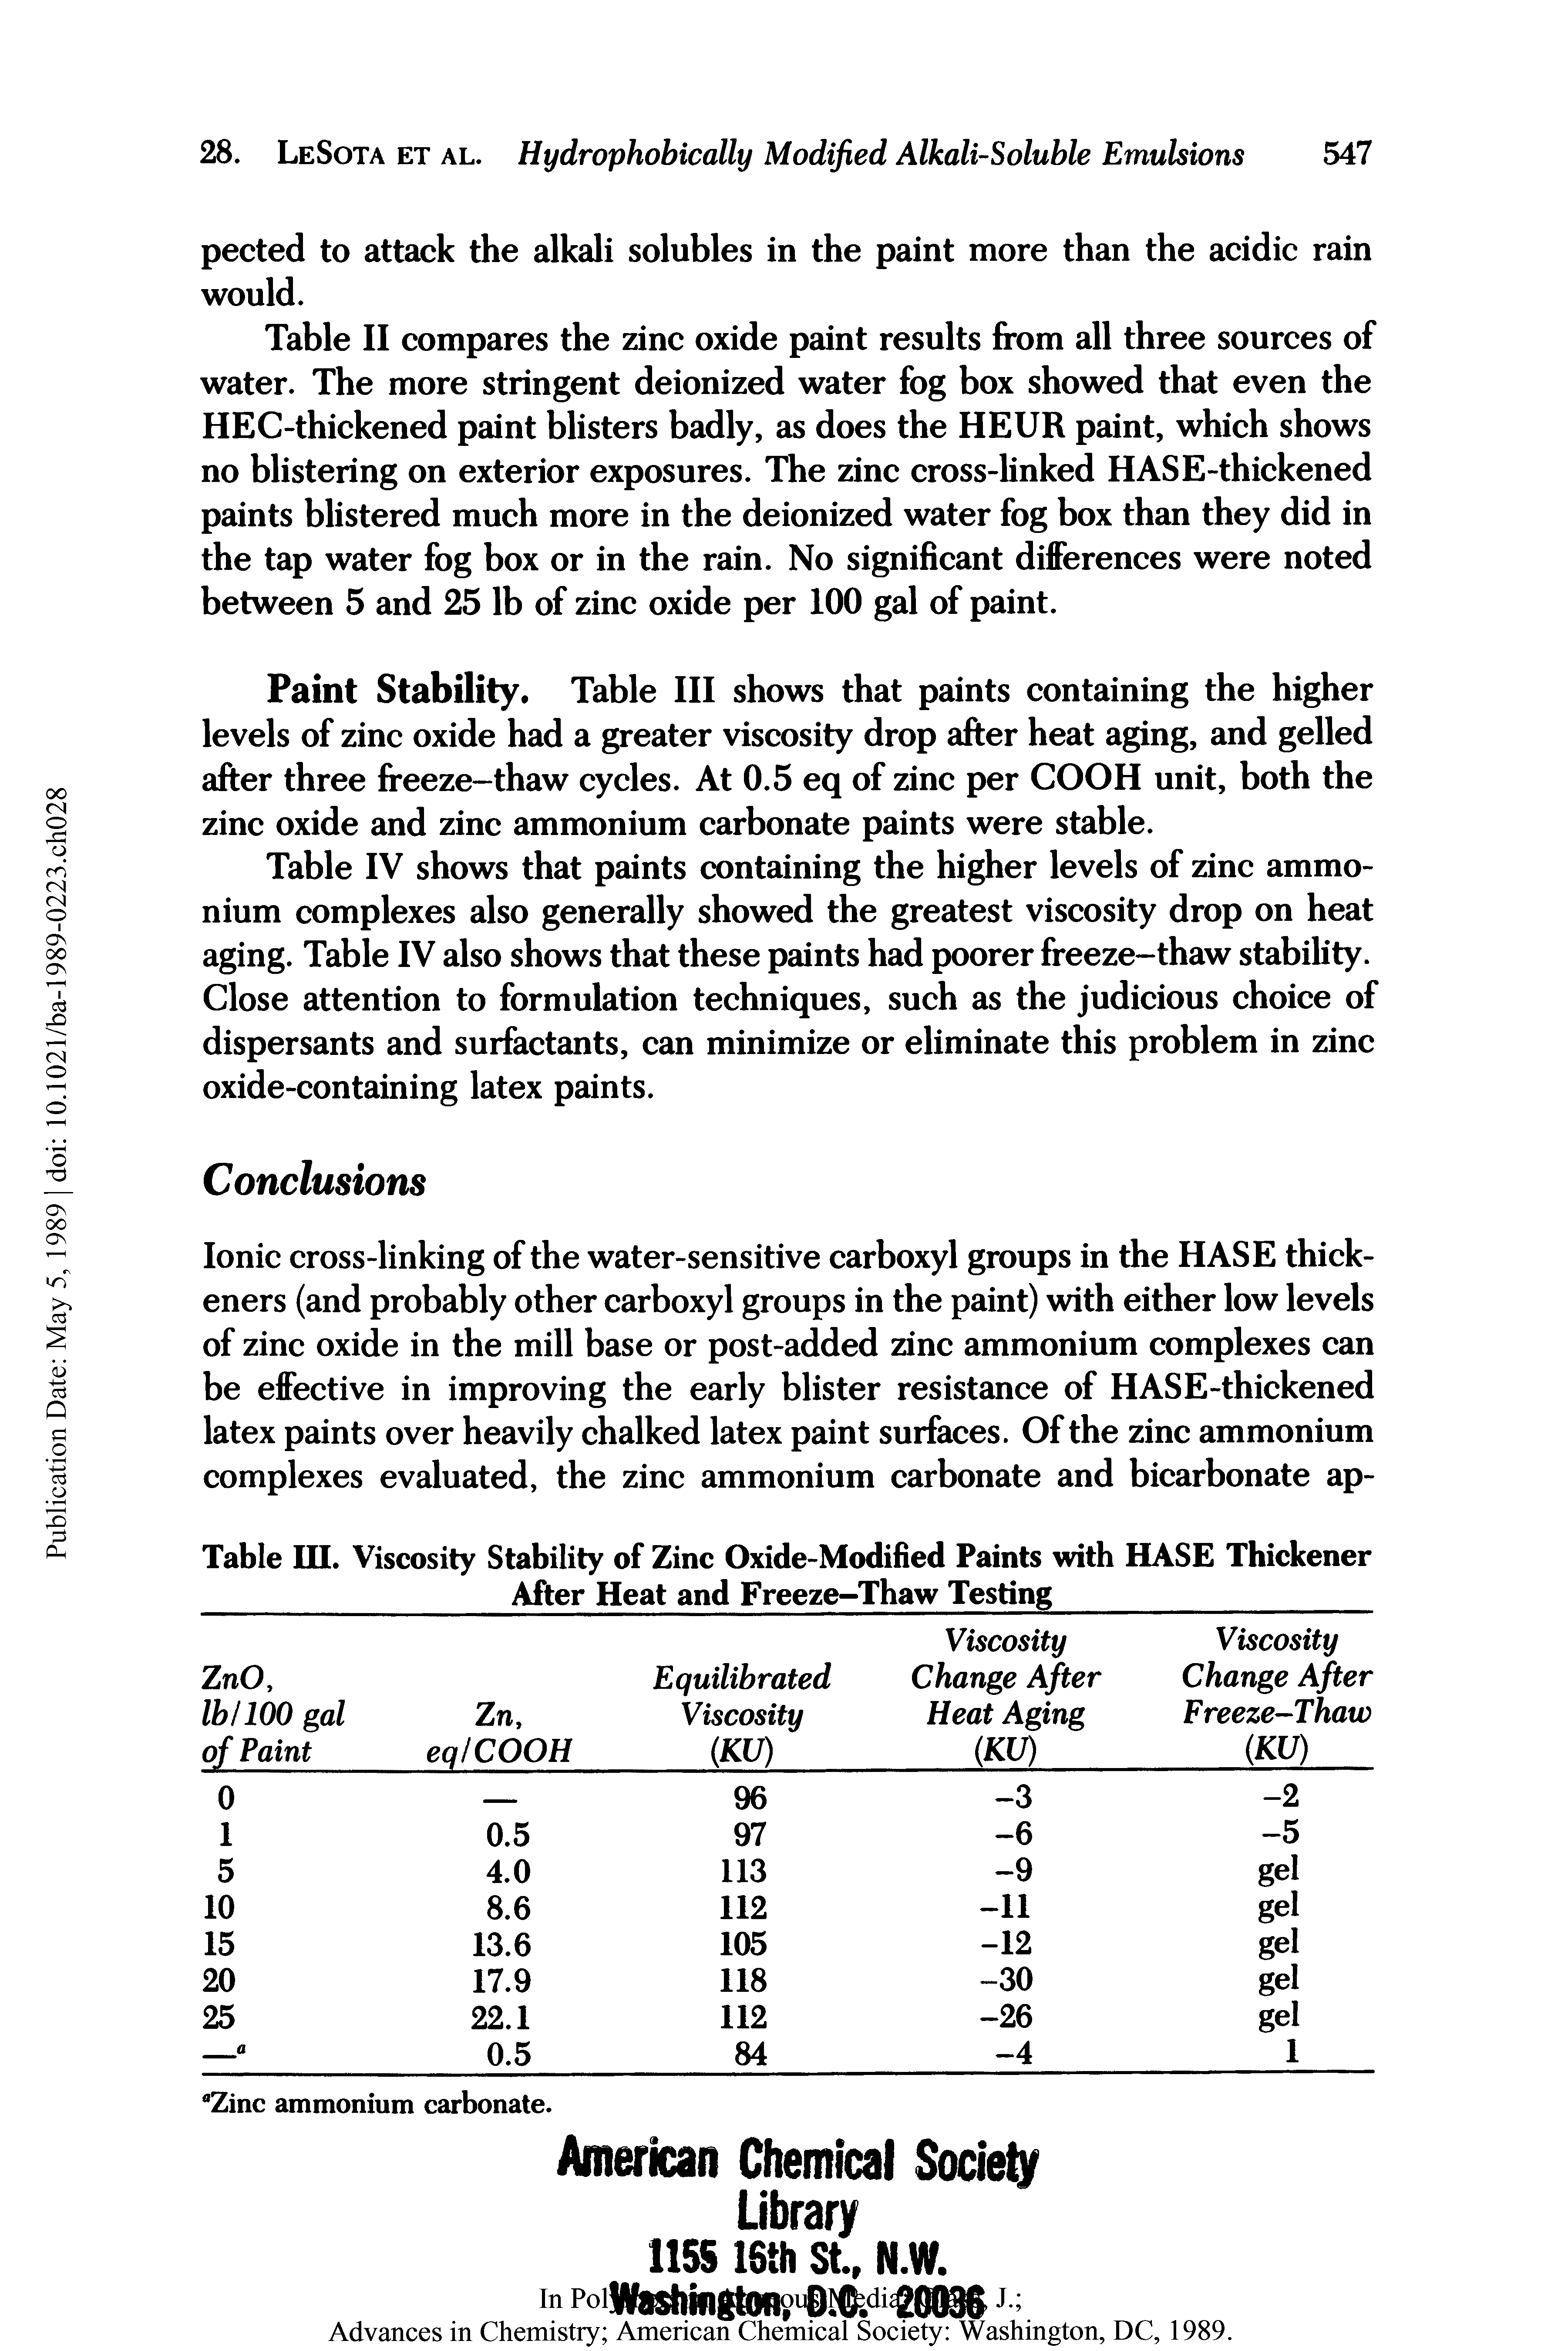 Table IV shows that paints containing the higher levels of zinc ammonium complexes also generally showed the greatest viscosity drop on heat aging. Table IV also shows that these paints had poorer freeze-thaw stability. Close attention to formulation techniques, such as the judicious choice of dispersants and surfactants, can minimize or eliminate this problem in zinc oxide-containing latex paints.